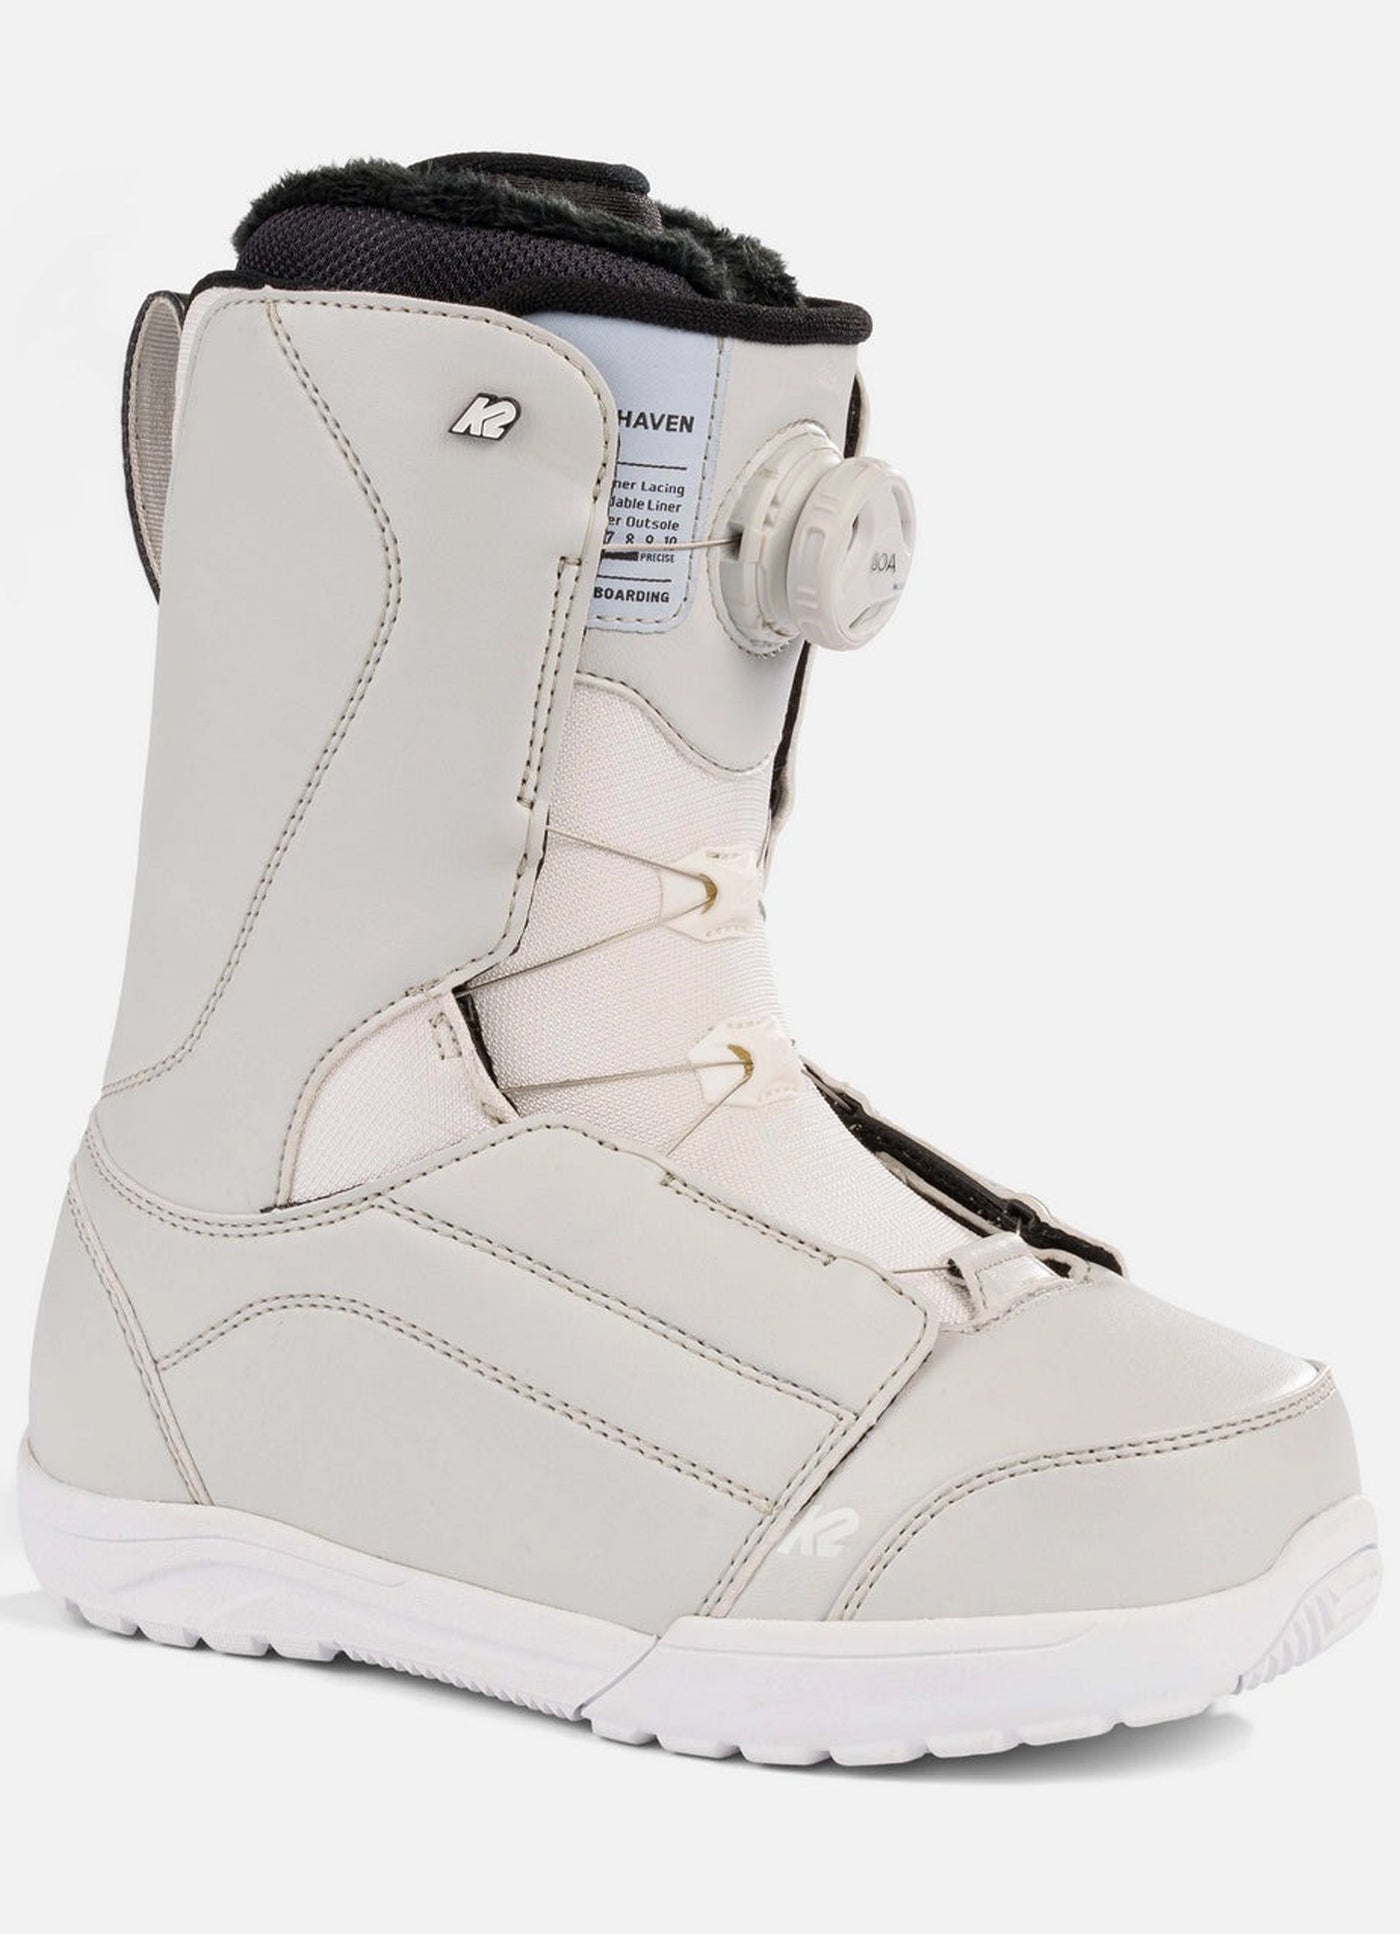 Snowboard Boots K2 HAVEN Womens, Grey 2024 Size 7